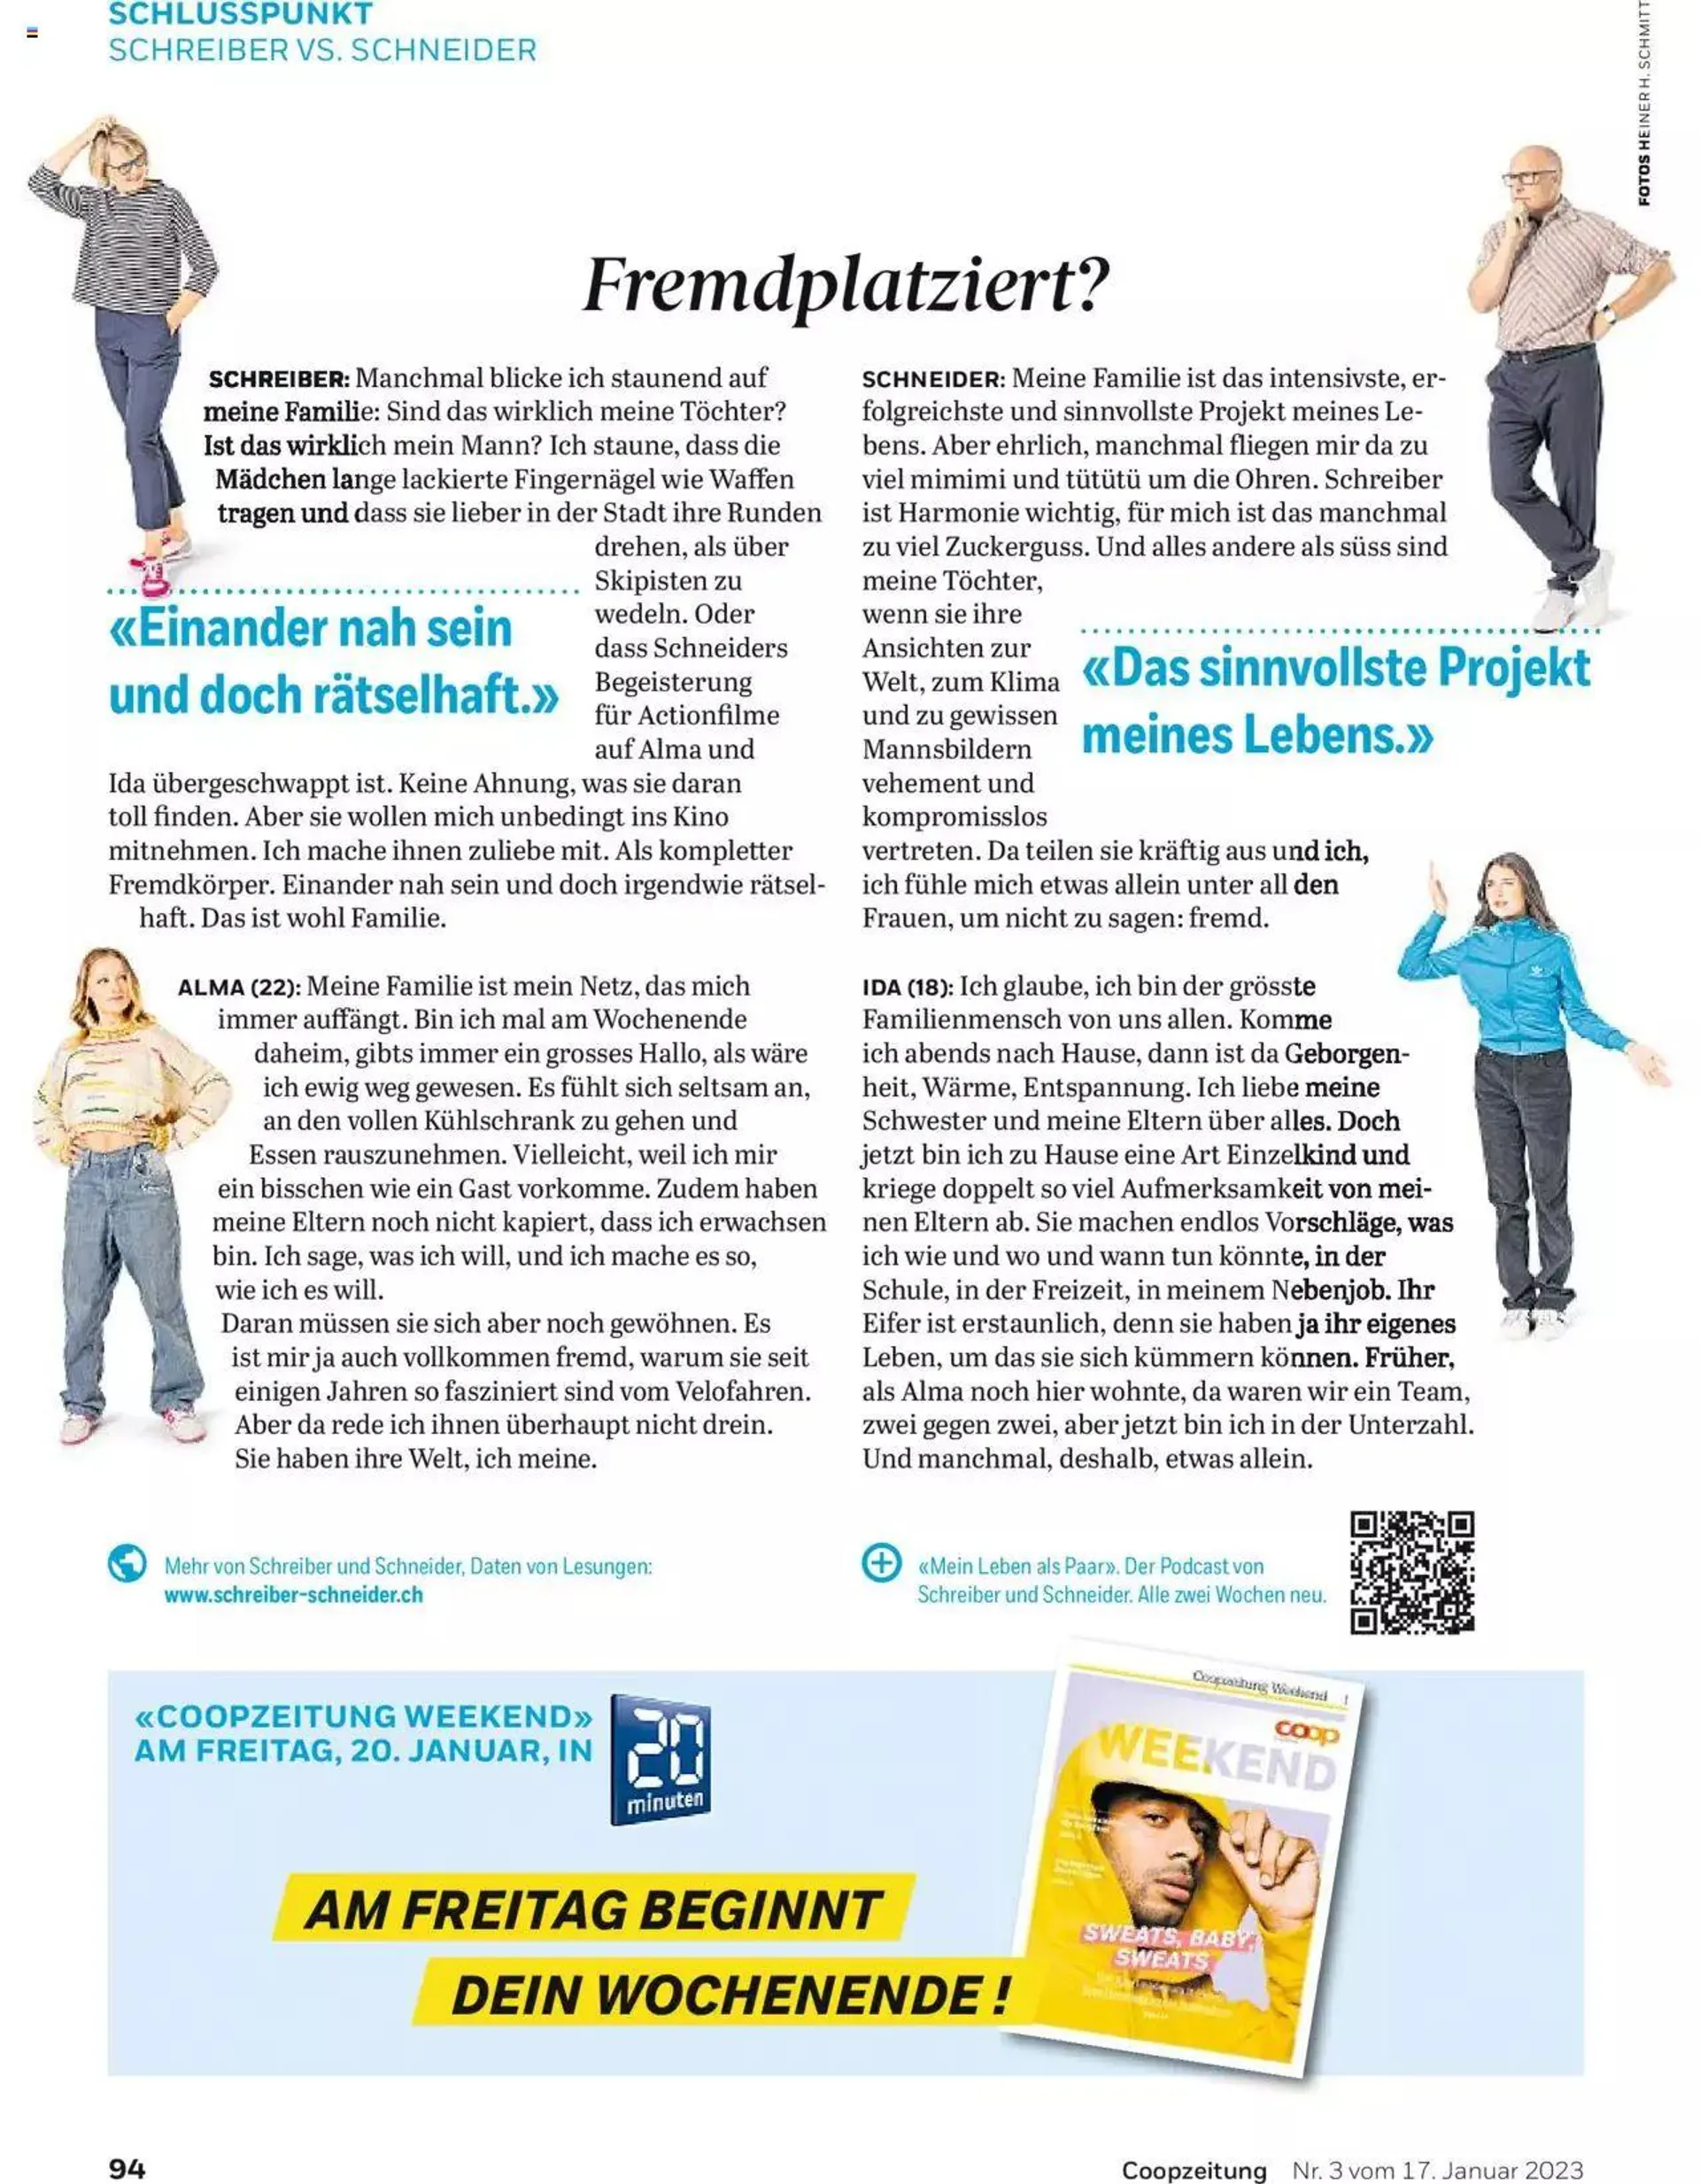 Coop - Aktions Woche - 93